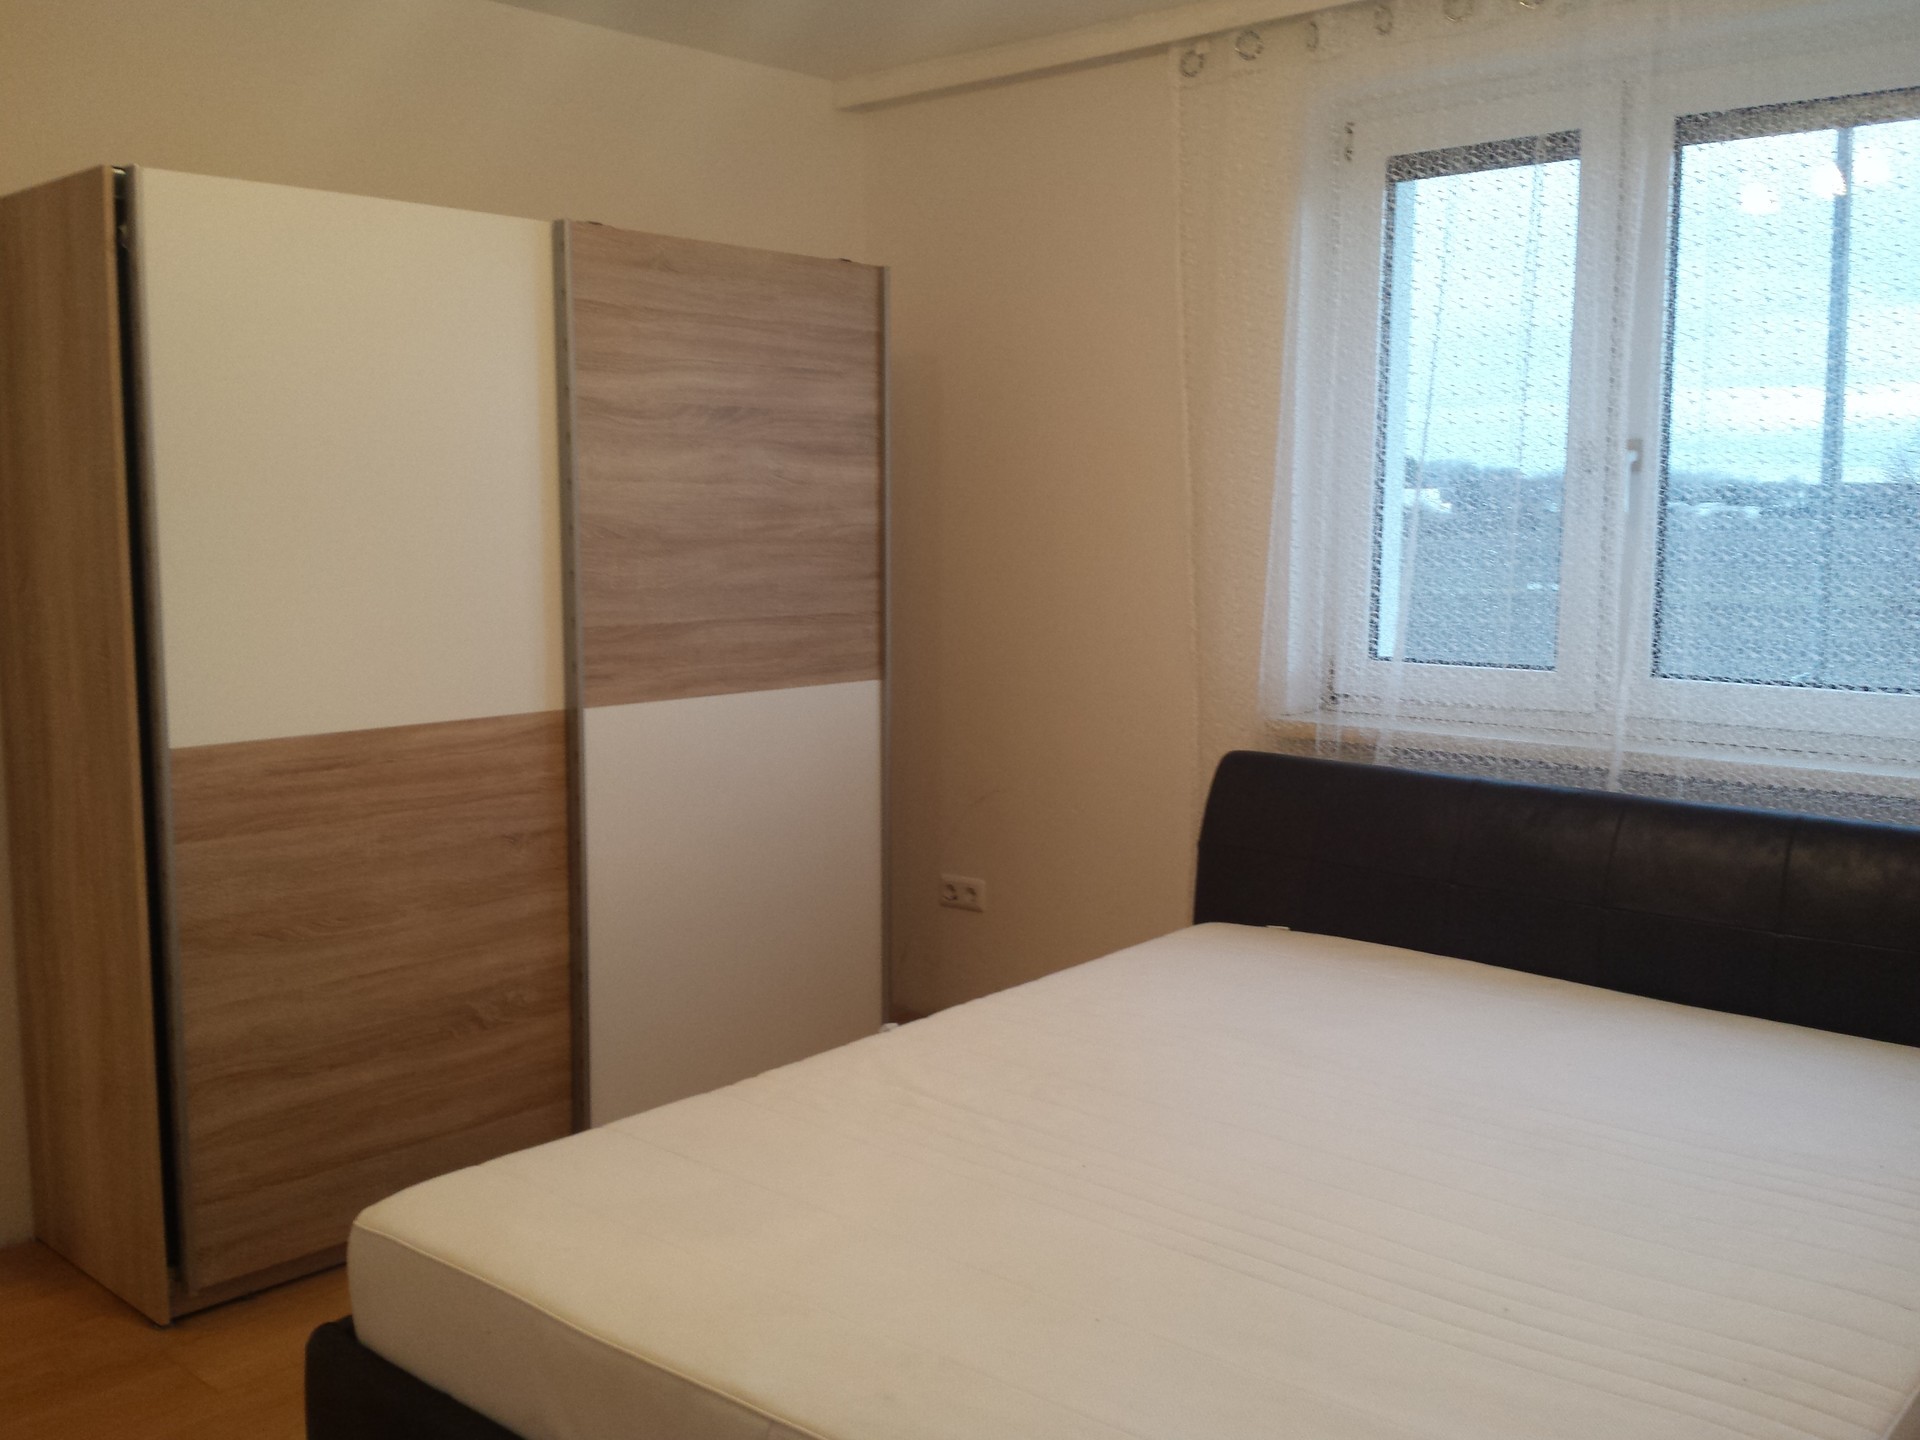 Dazzling 2 bedroom apartment in Zagreb for rent (Students only) | Zagreb apartment for rent 14